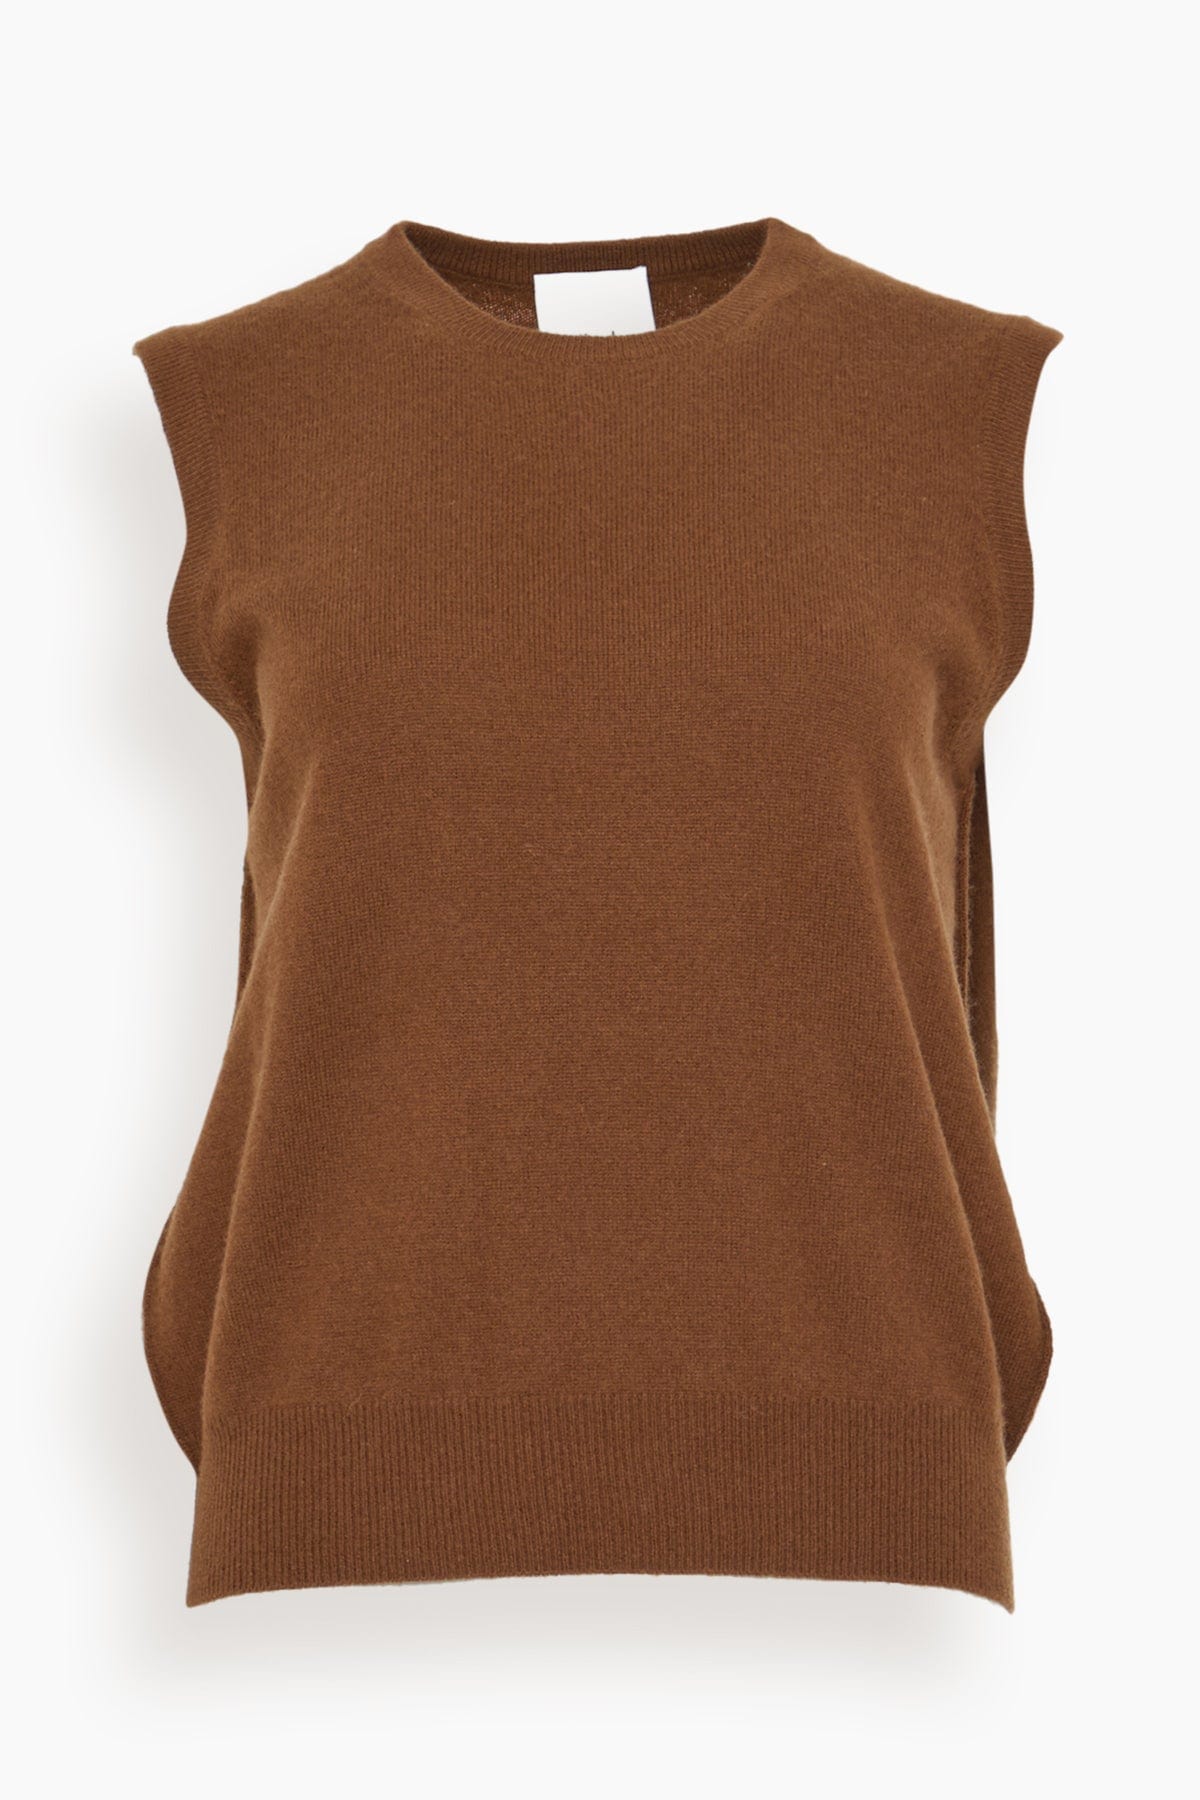 Allude Sweaters RD Sweater 0/1 in Brown